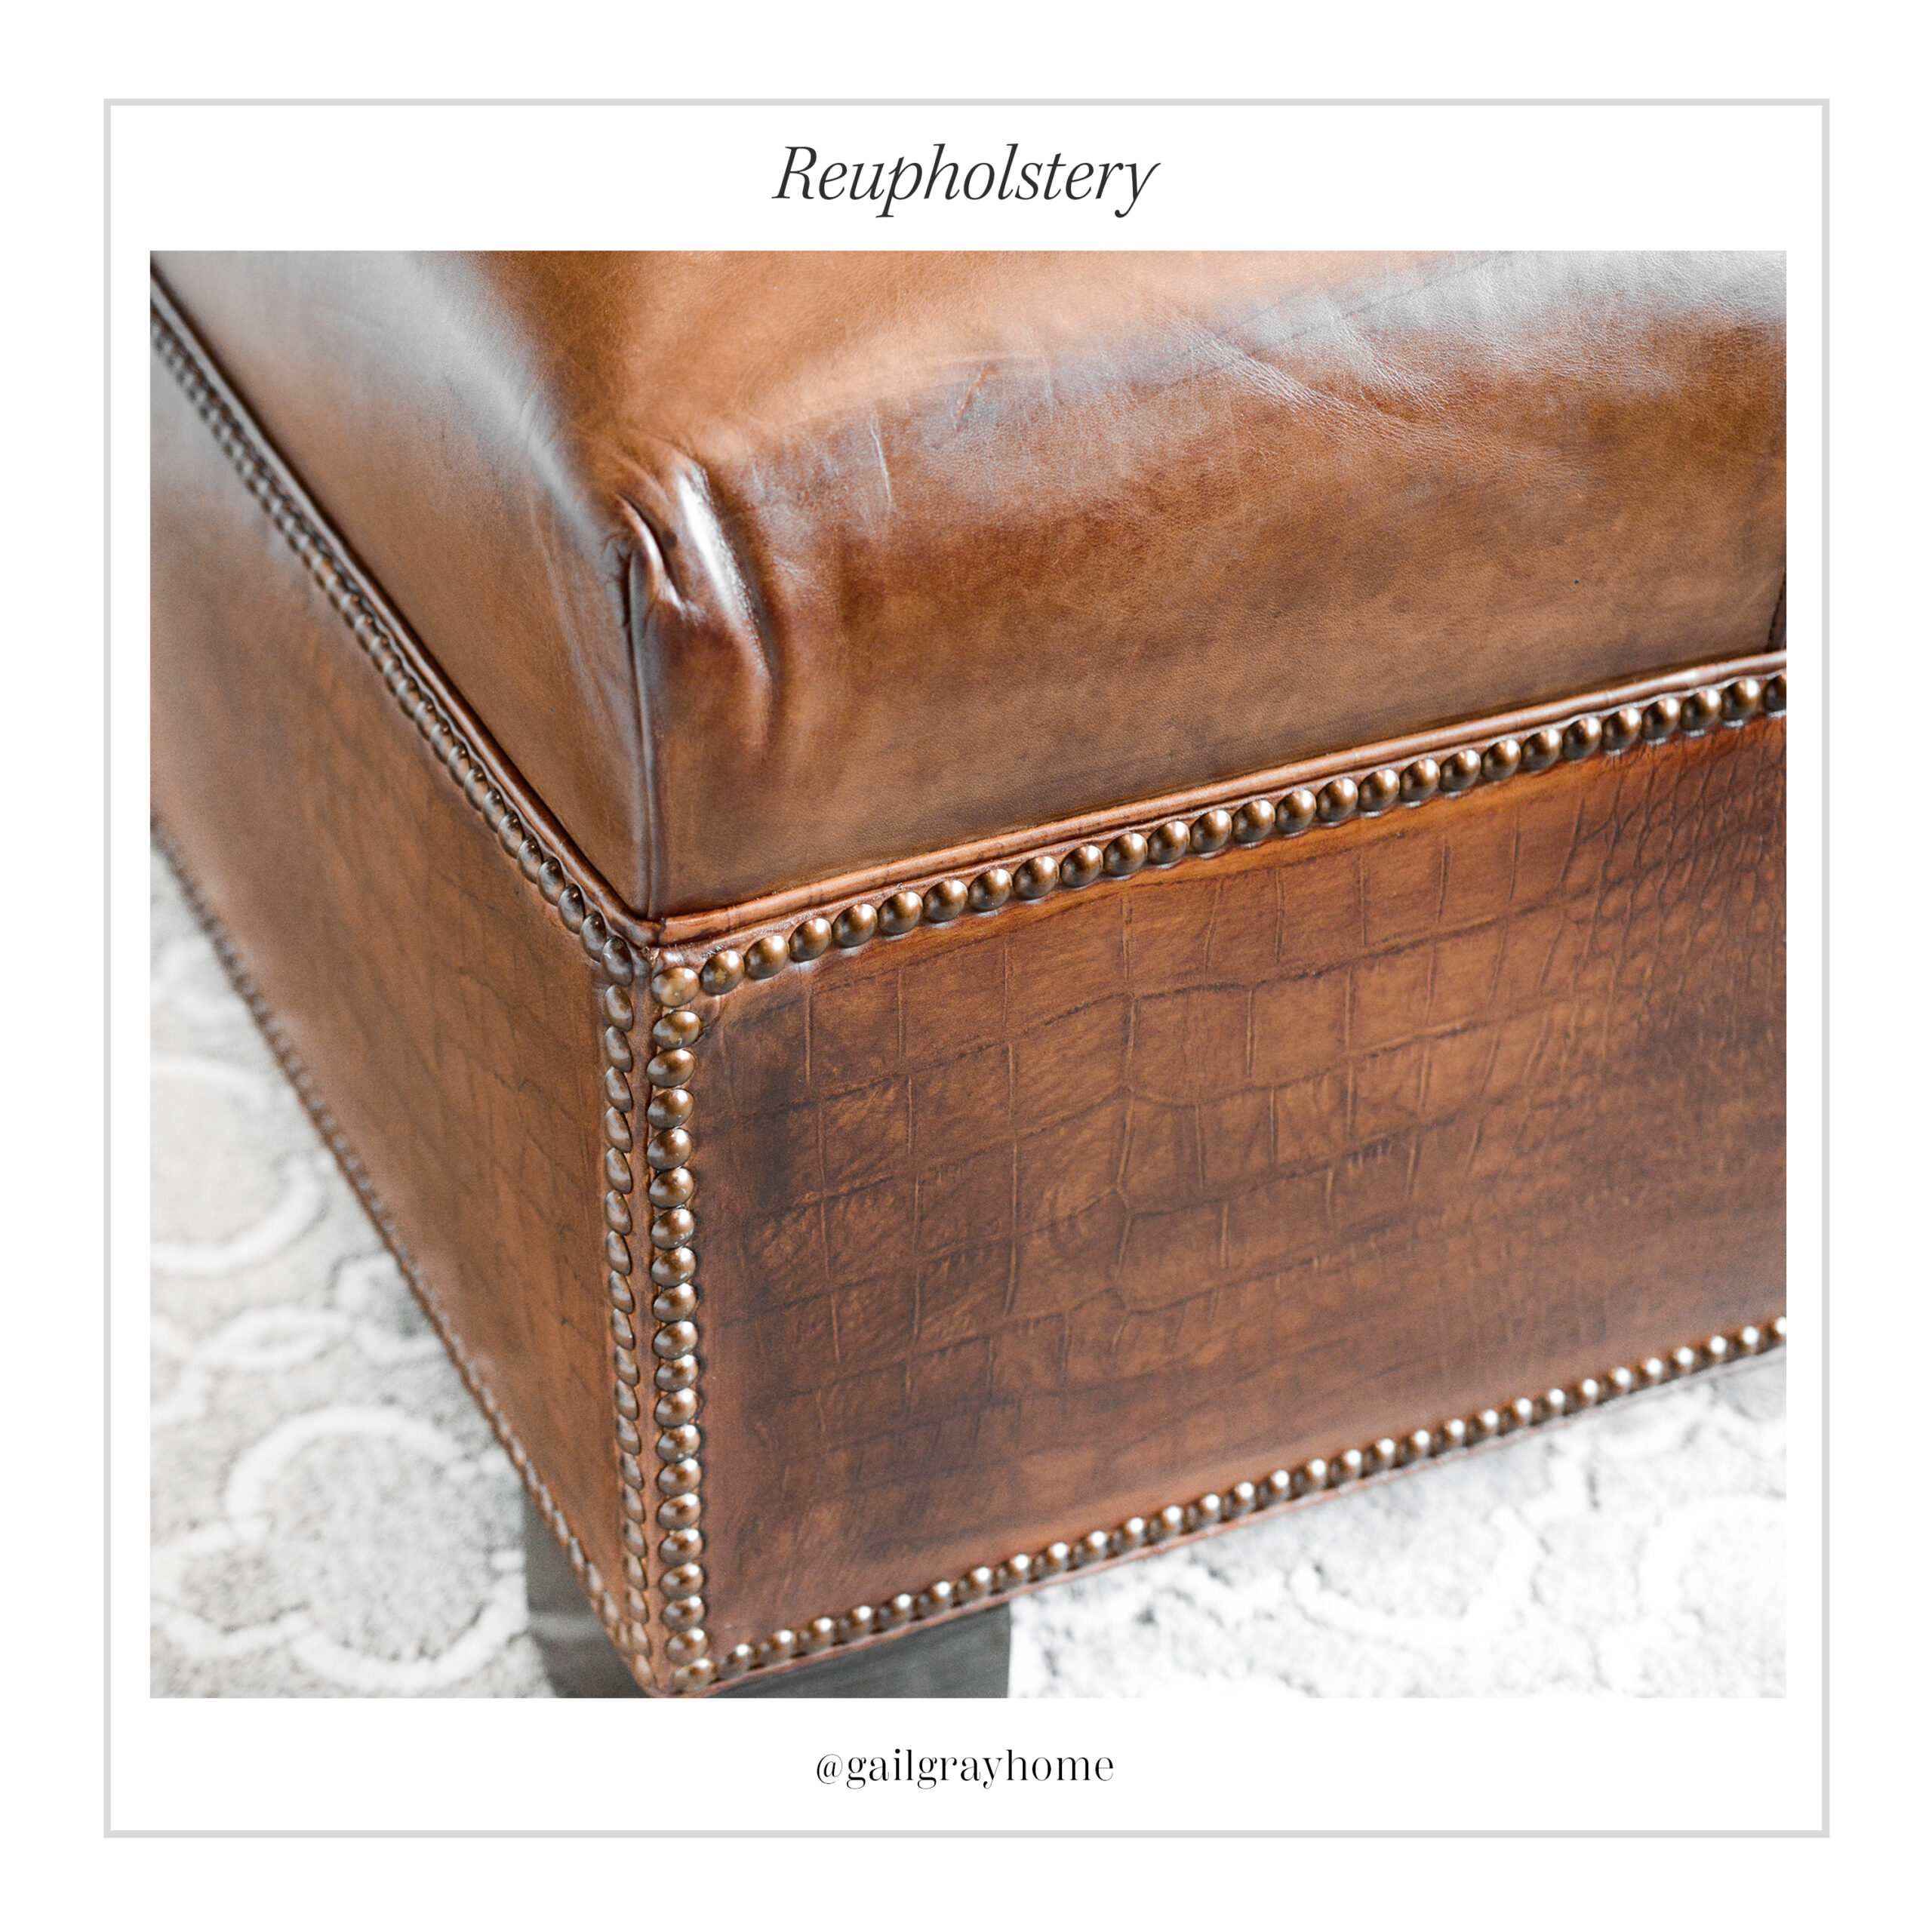 Reupholstery Design Services at GailGray Home